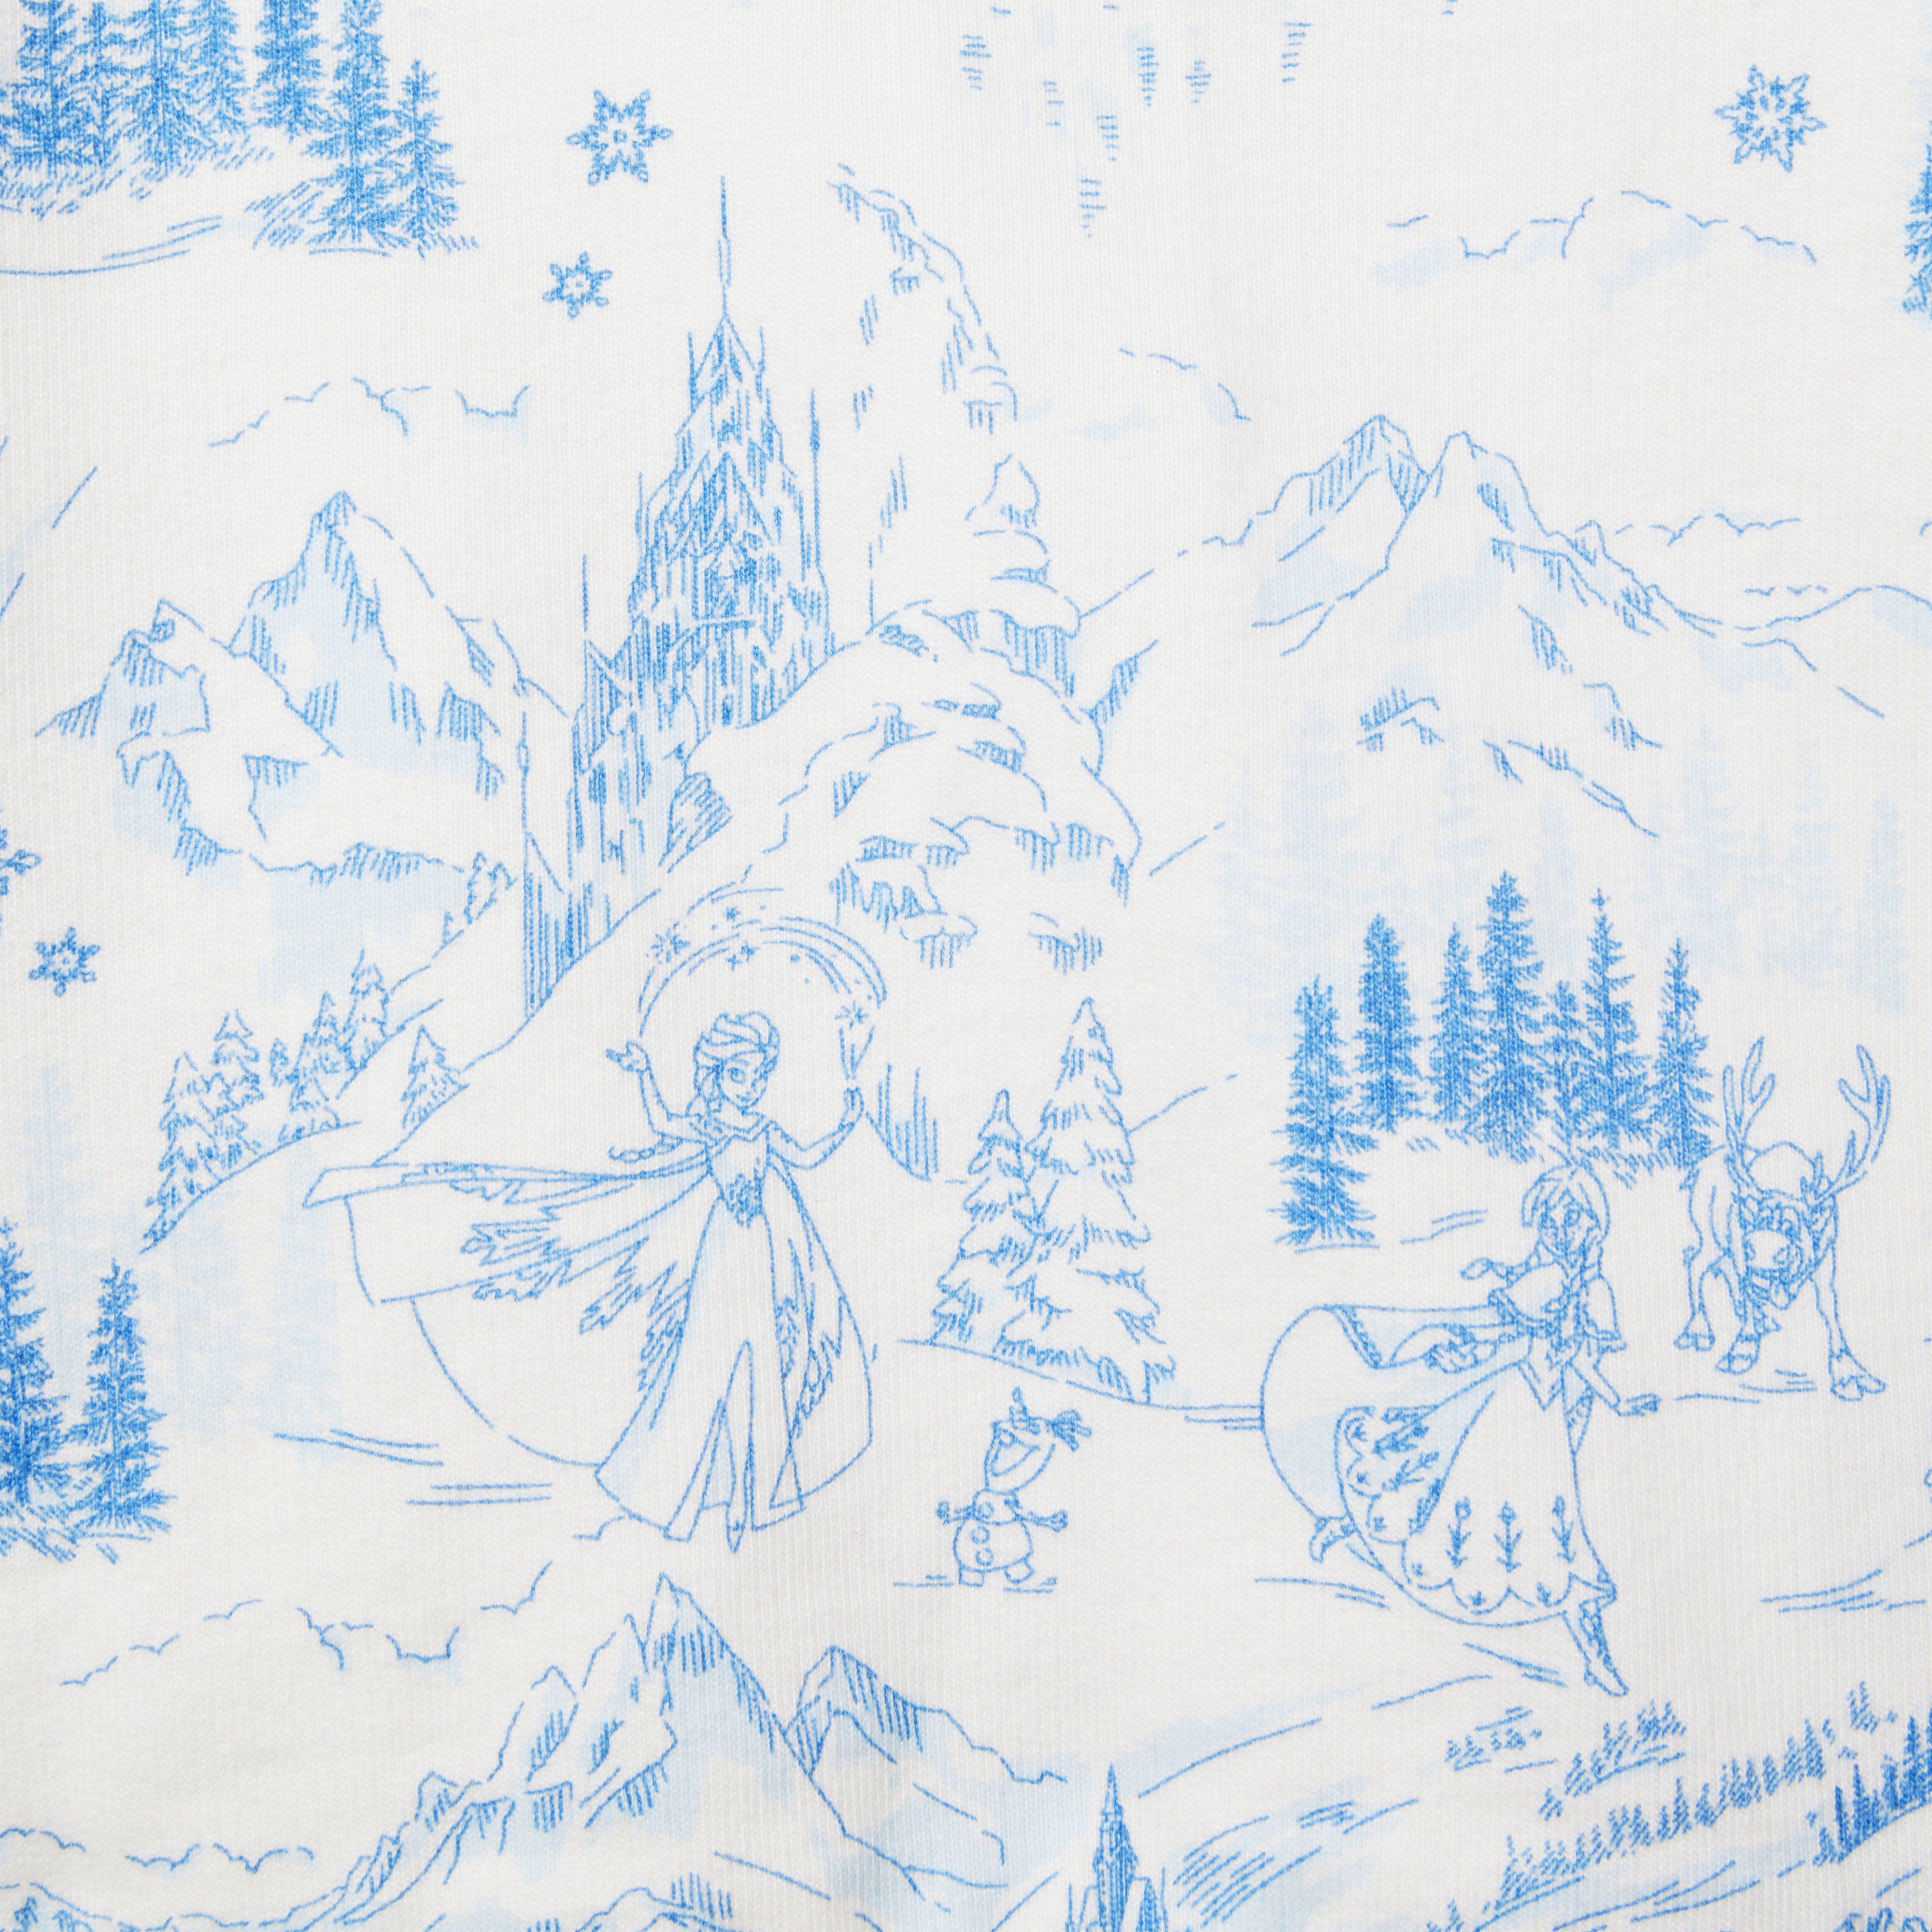 Girl Cream And Sugar Frozen Toile Disney Frozen Toile Legging by Janie and  Jack